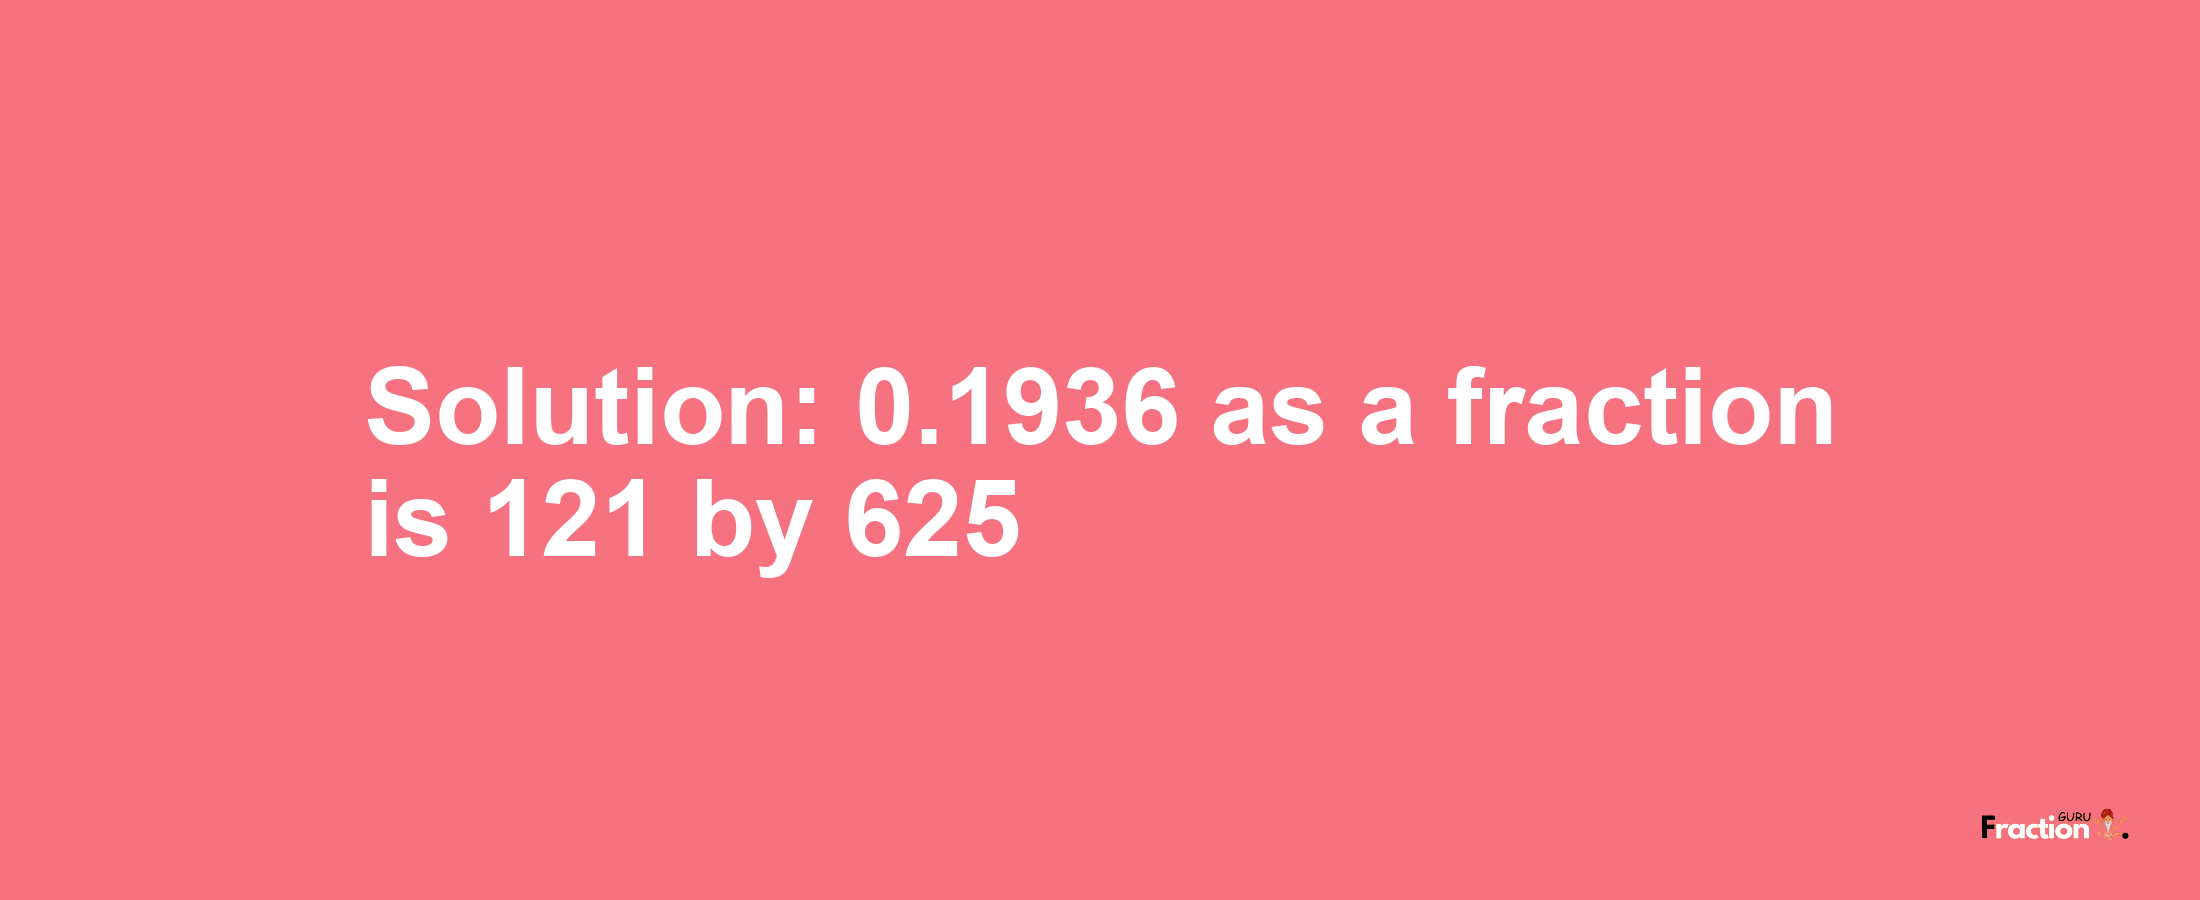 Solution:0.1936 as a fraction is 121/625